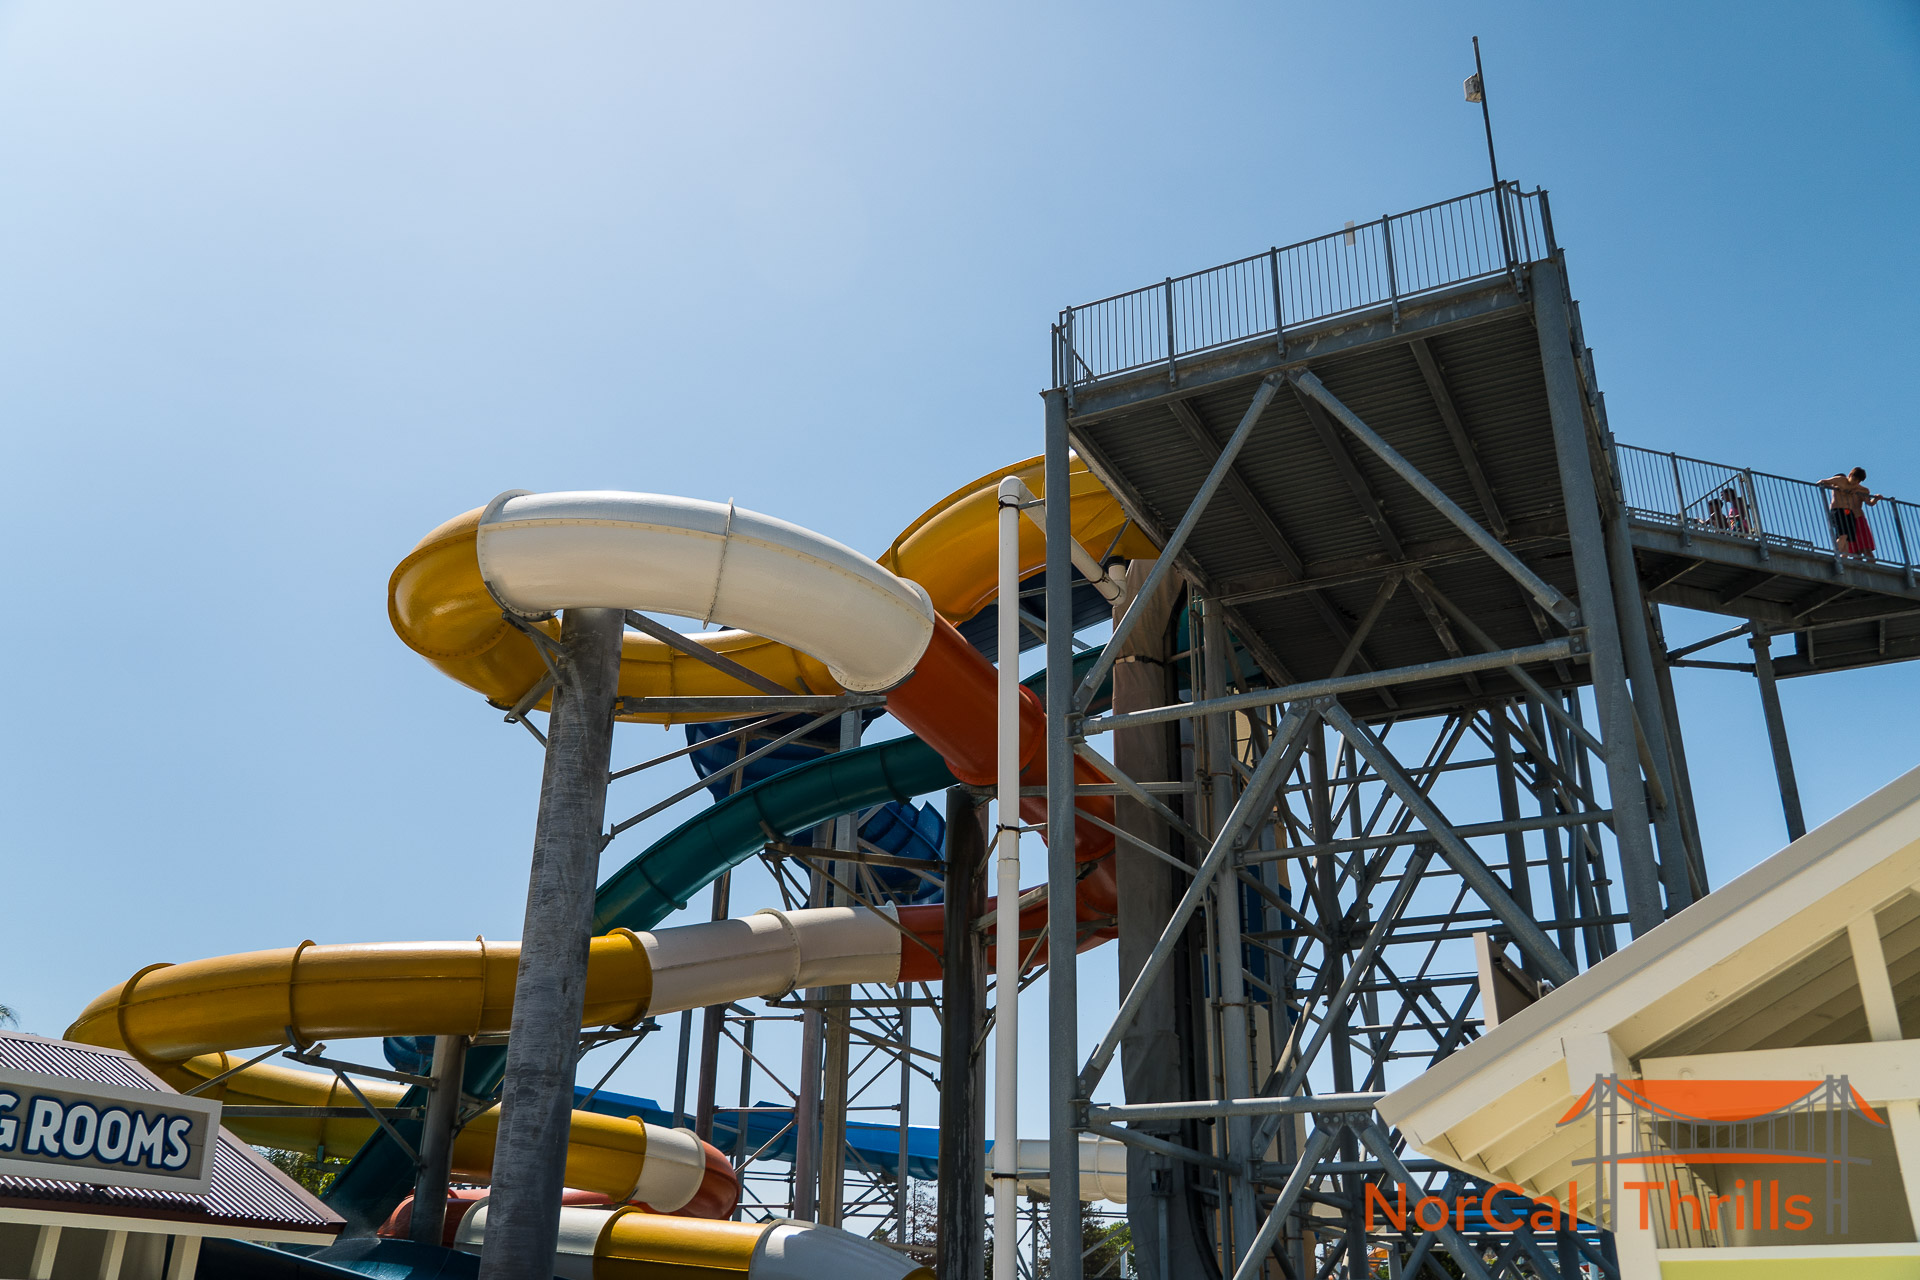 Slides & Attractions